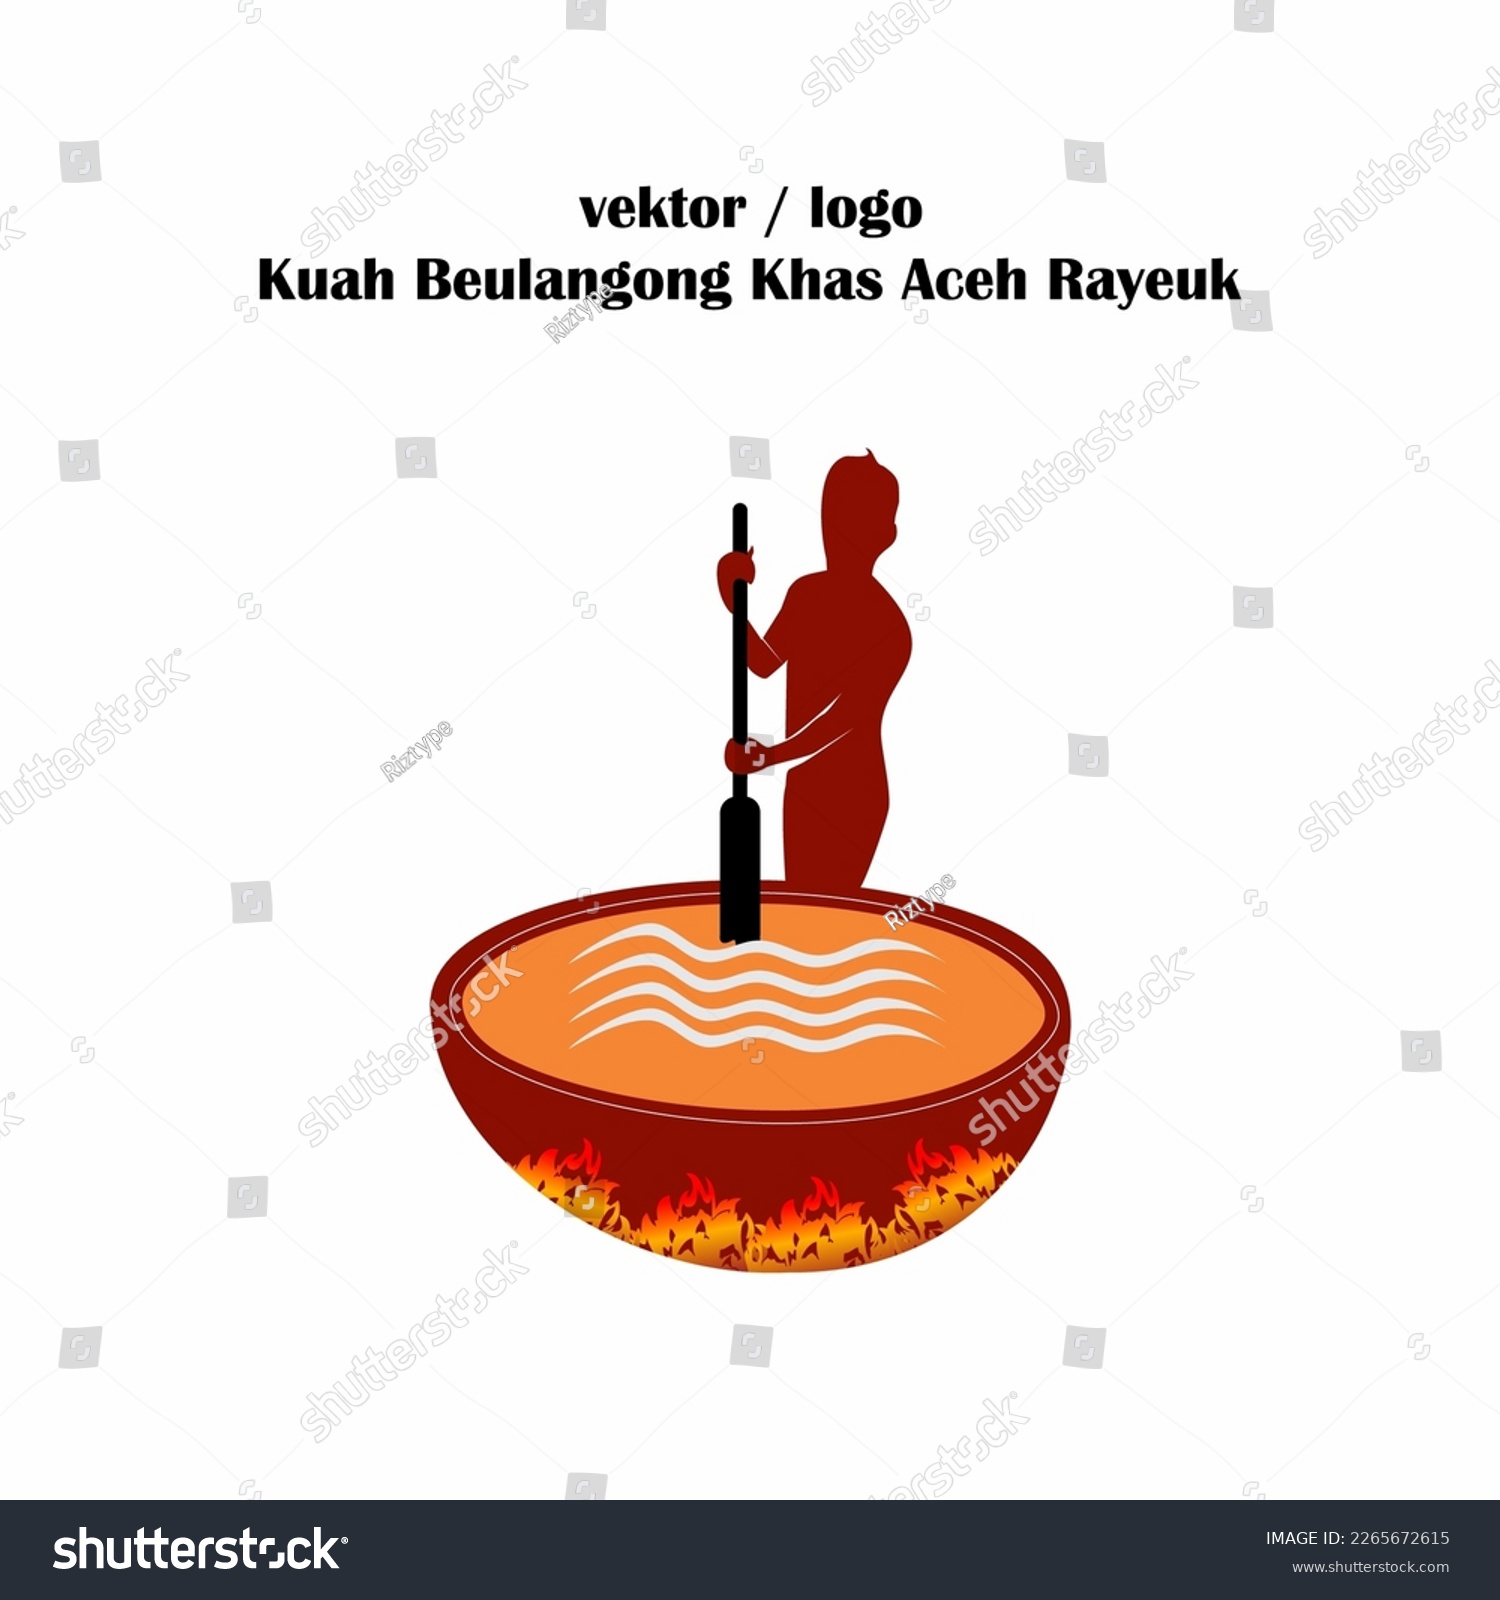 SVG of logo, vector of goat curry typical of aceh. Indonesian svg